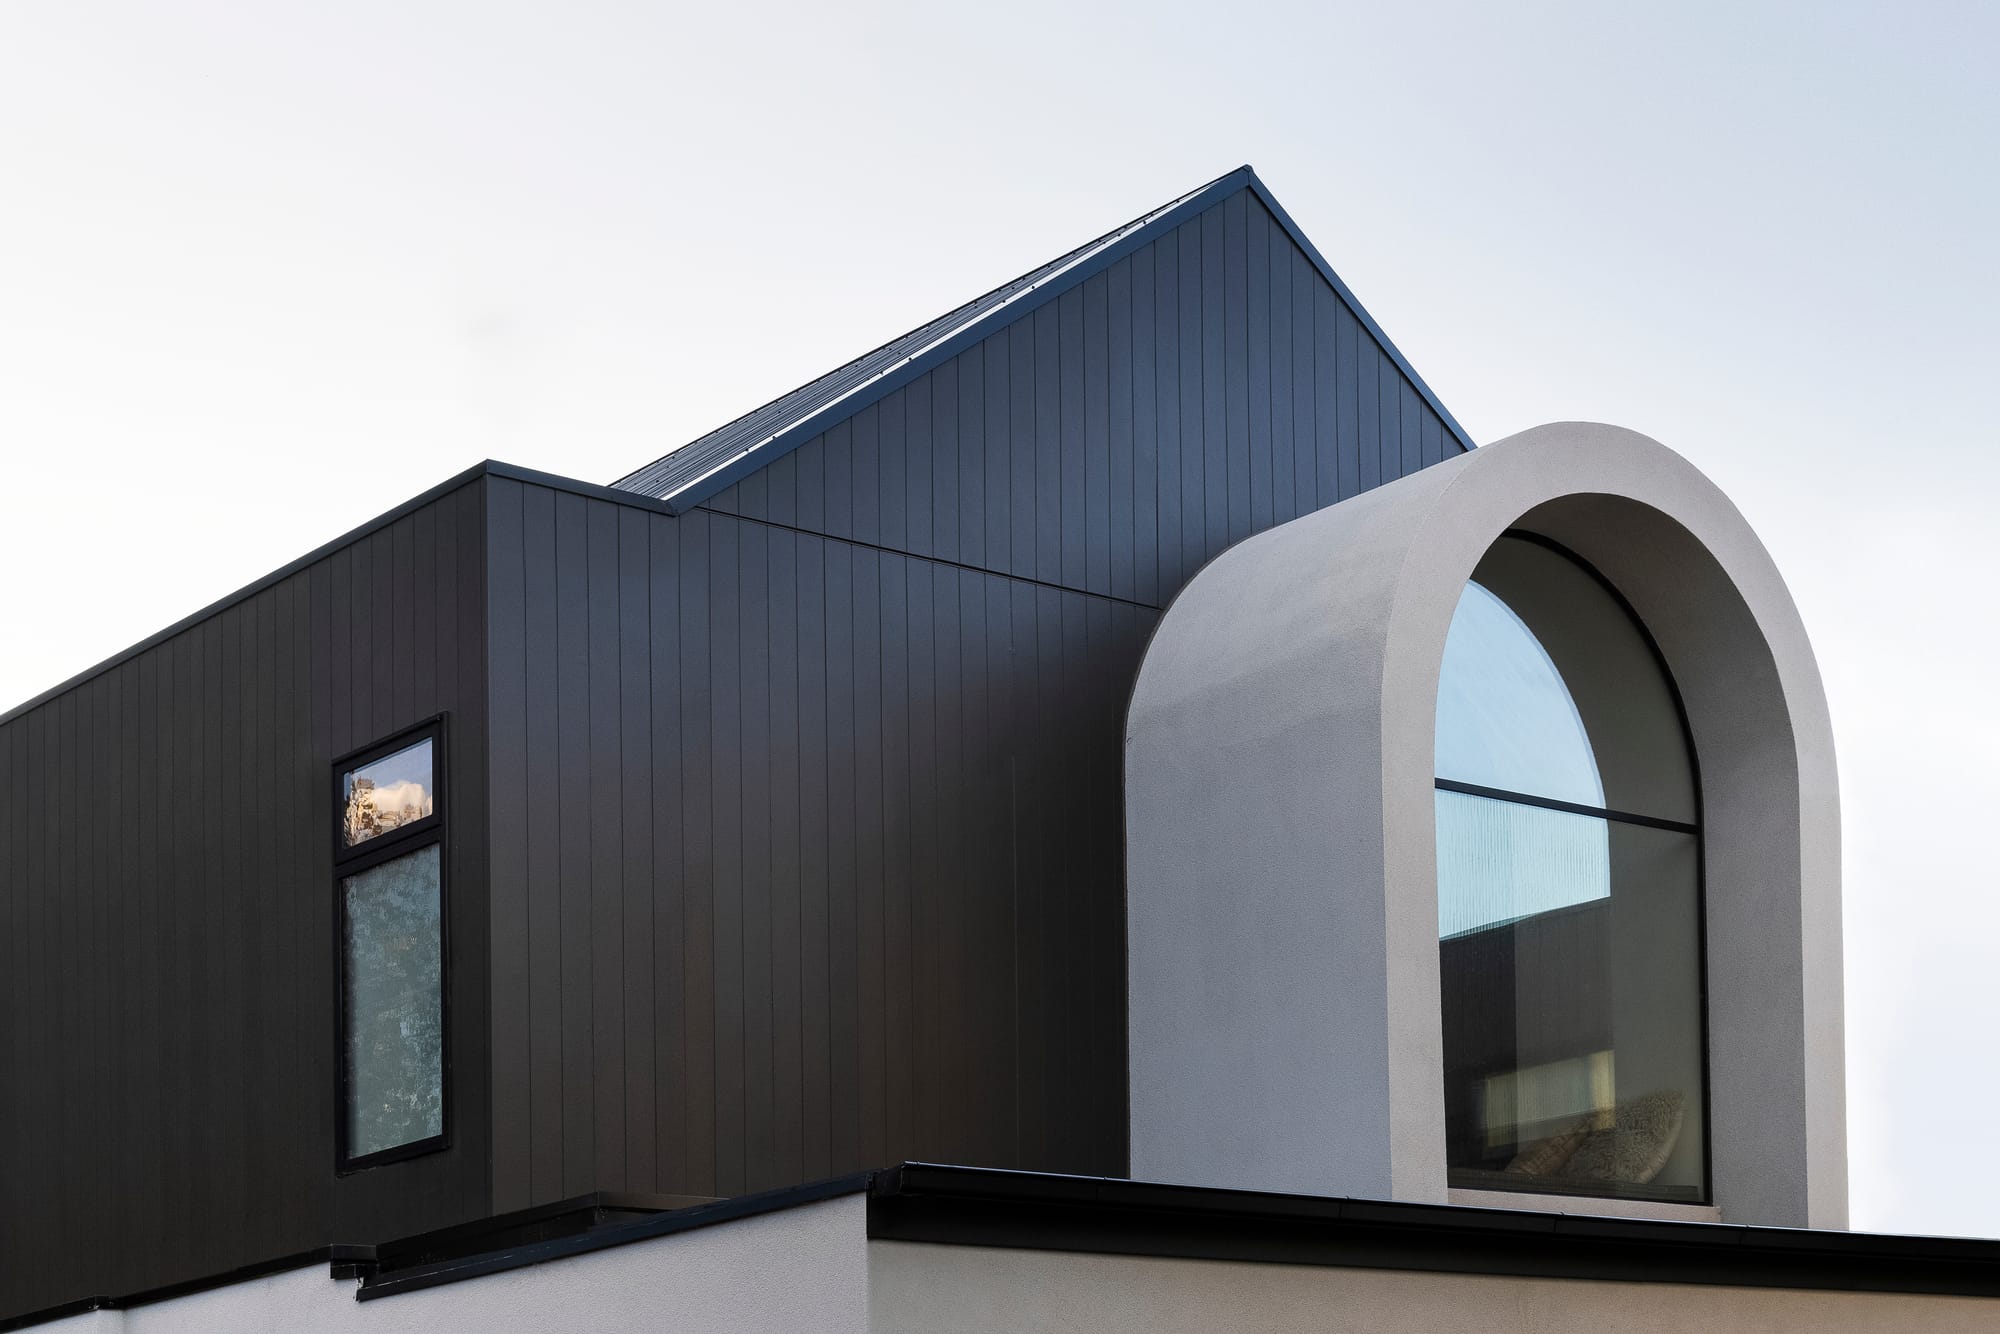 Goldsmith Residence by C.Kairouz Architects. Photography by Spacecraft. Second storey facade with gabled roof and large, concrete arched window. Second storey finished in black timber clad. 